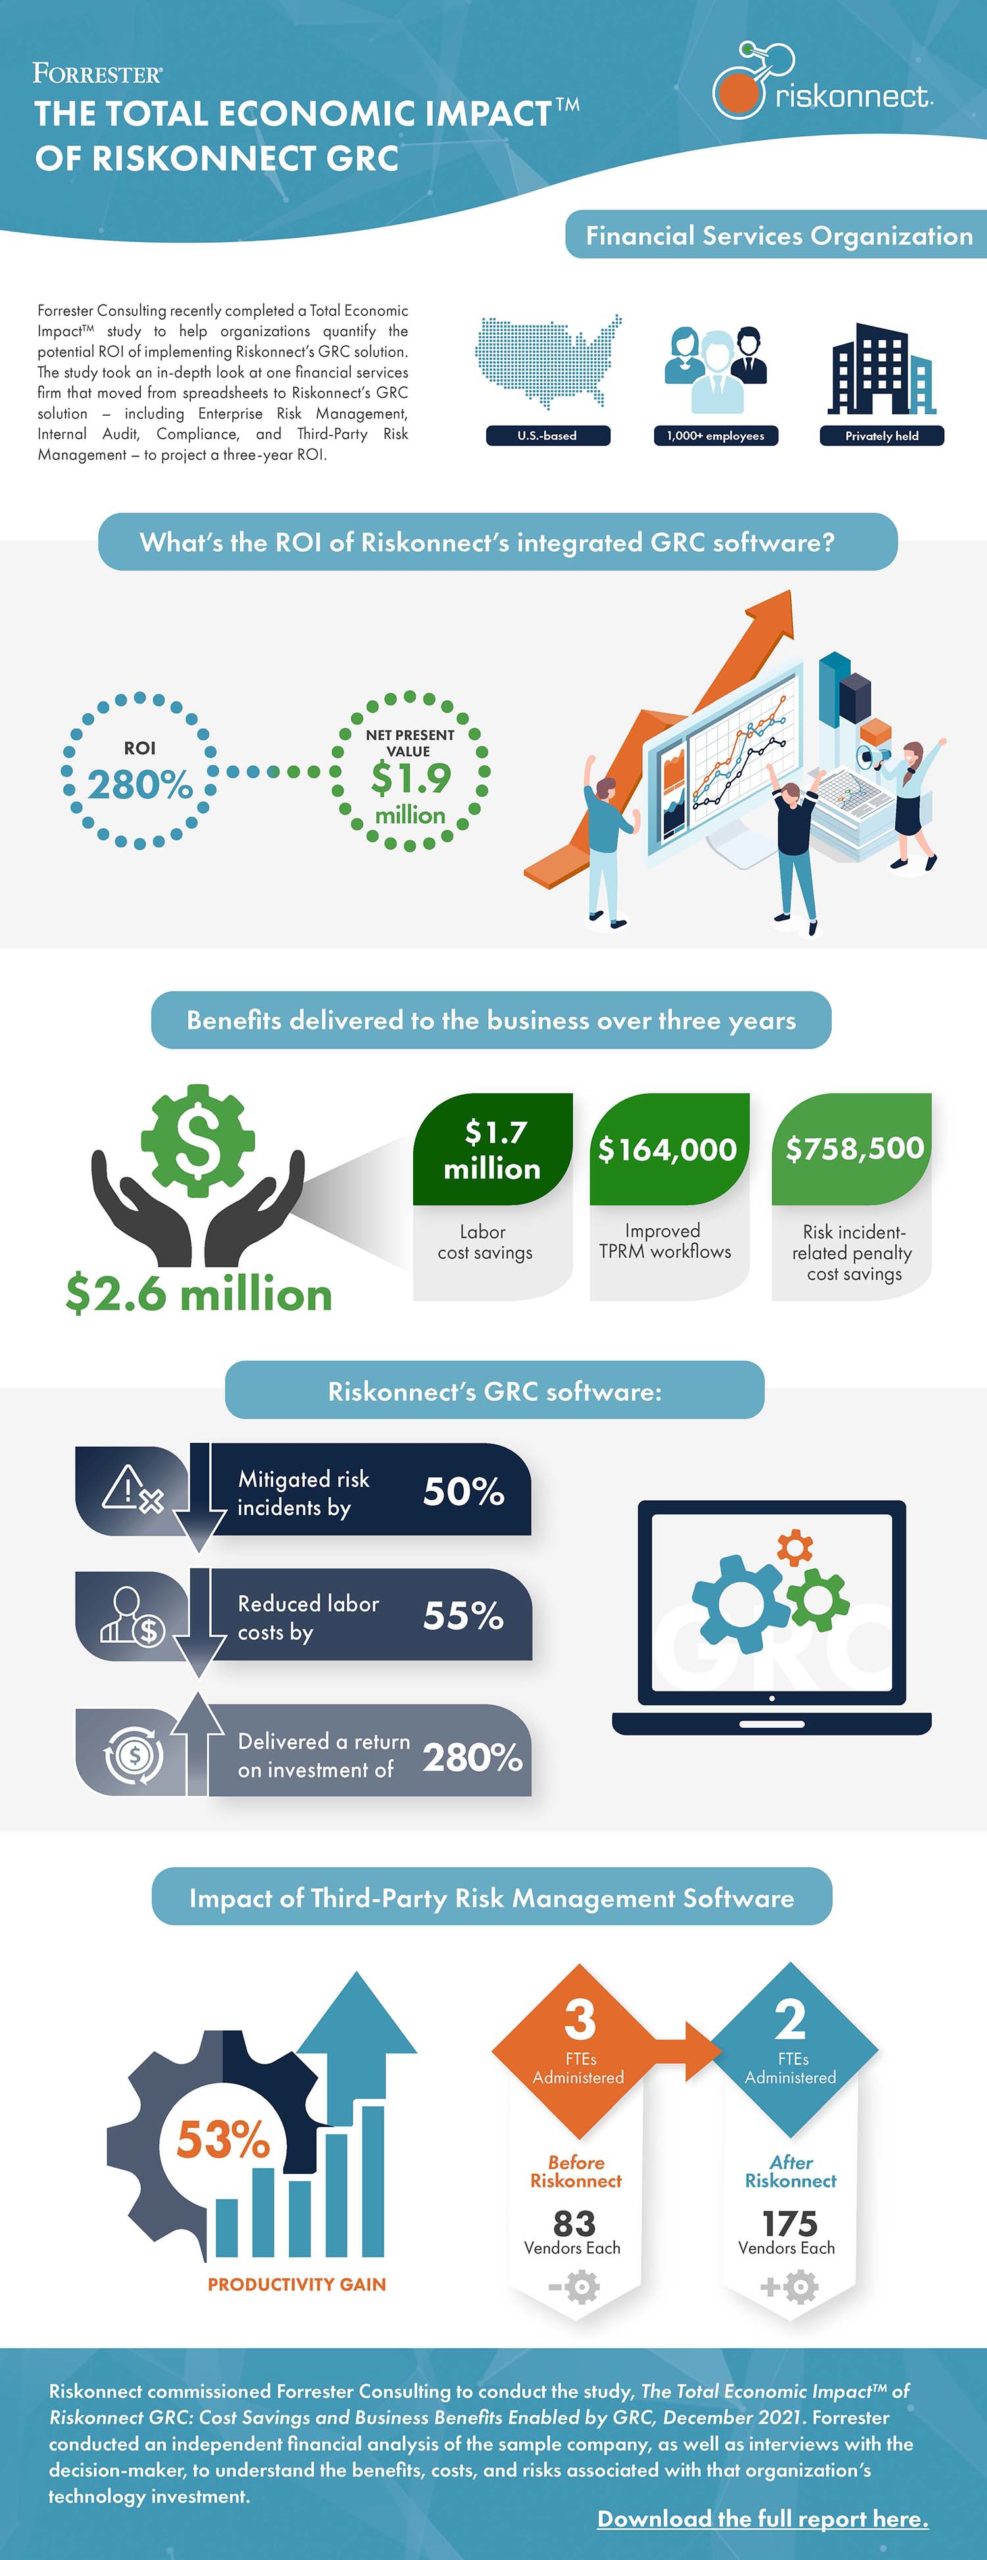 2021 TEI Infographic Forrester_Riskonnect-a